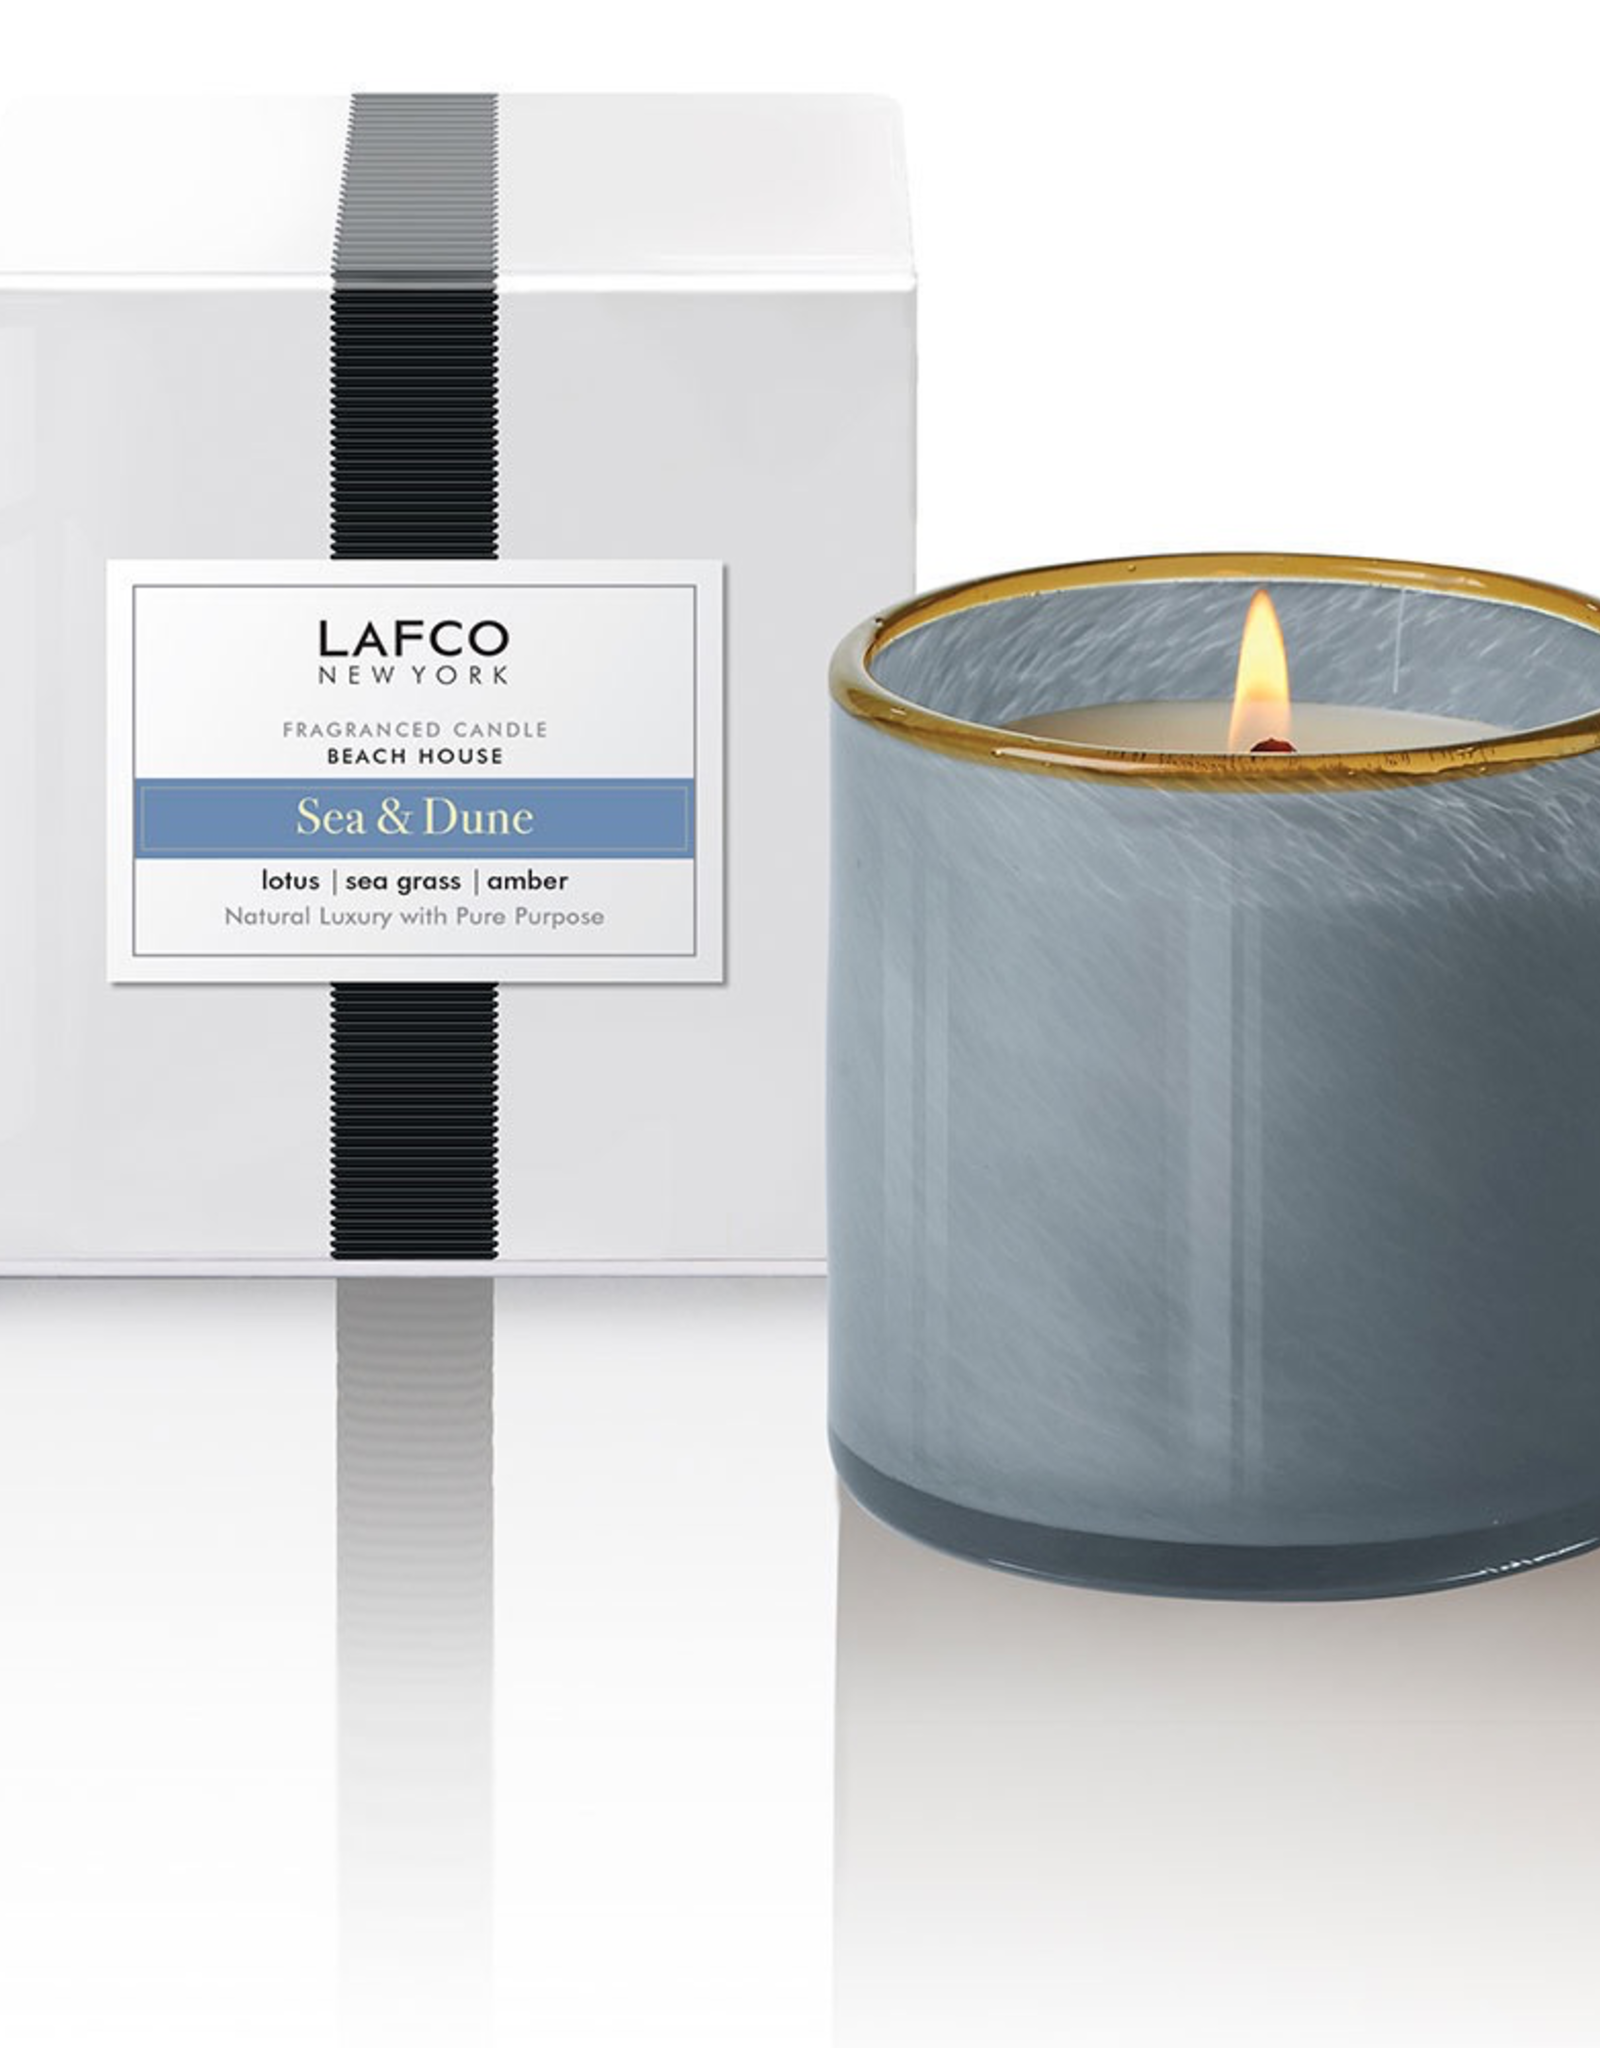 Sea and Dune Beach House Lafco Candle